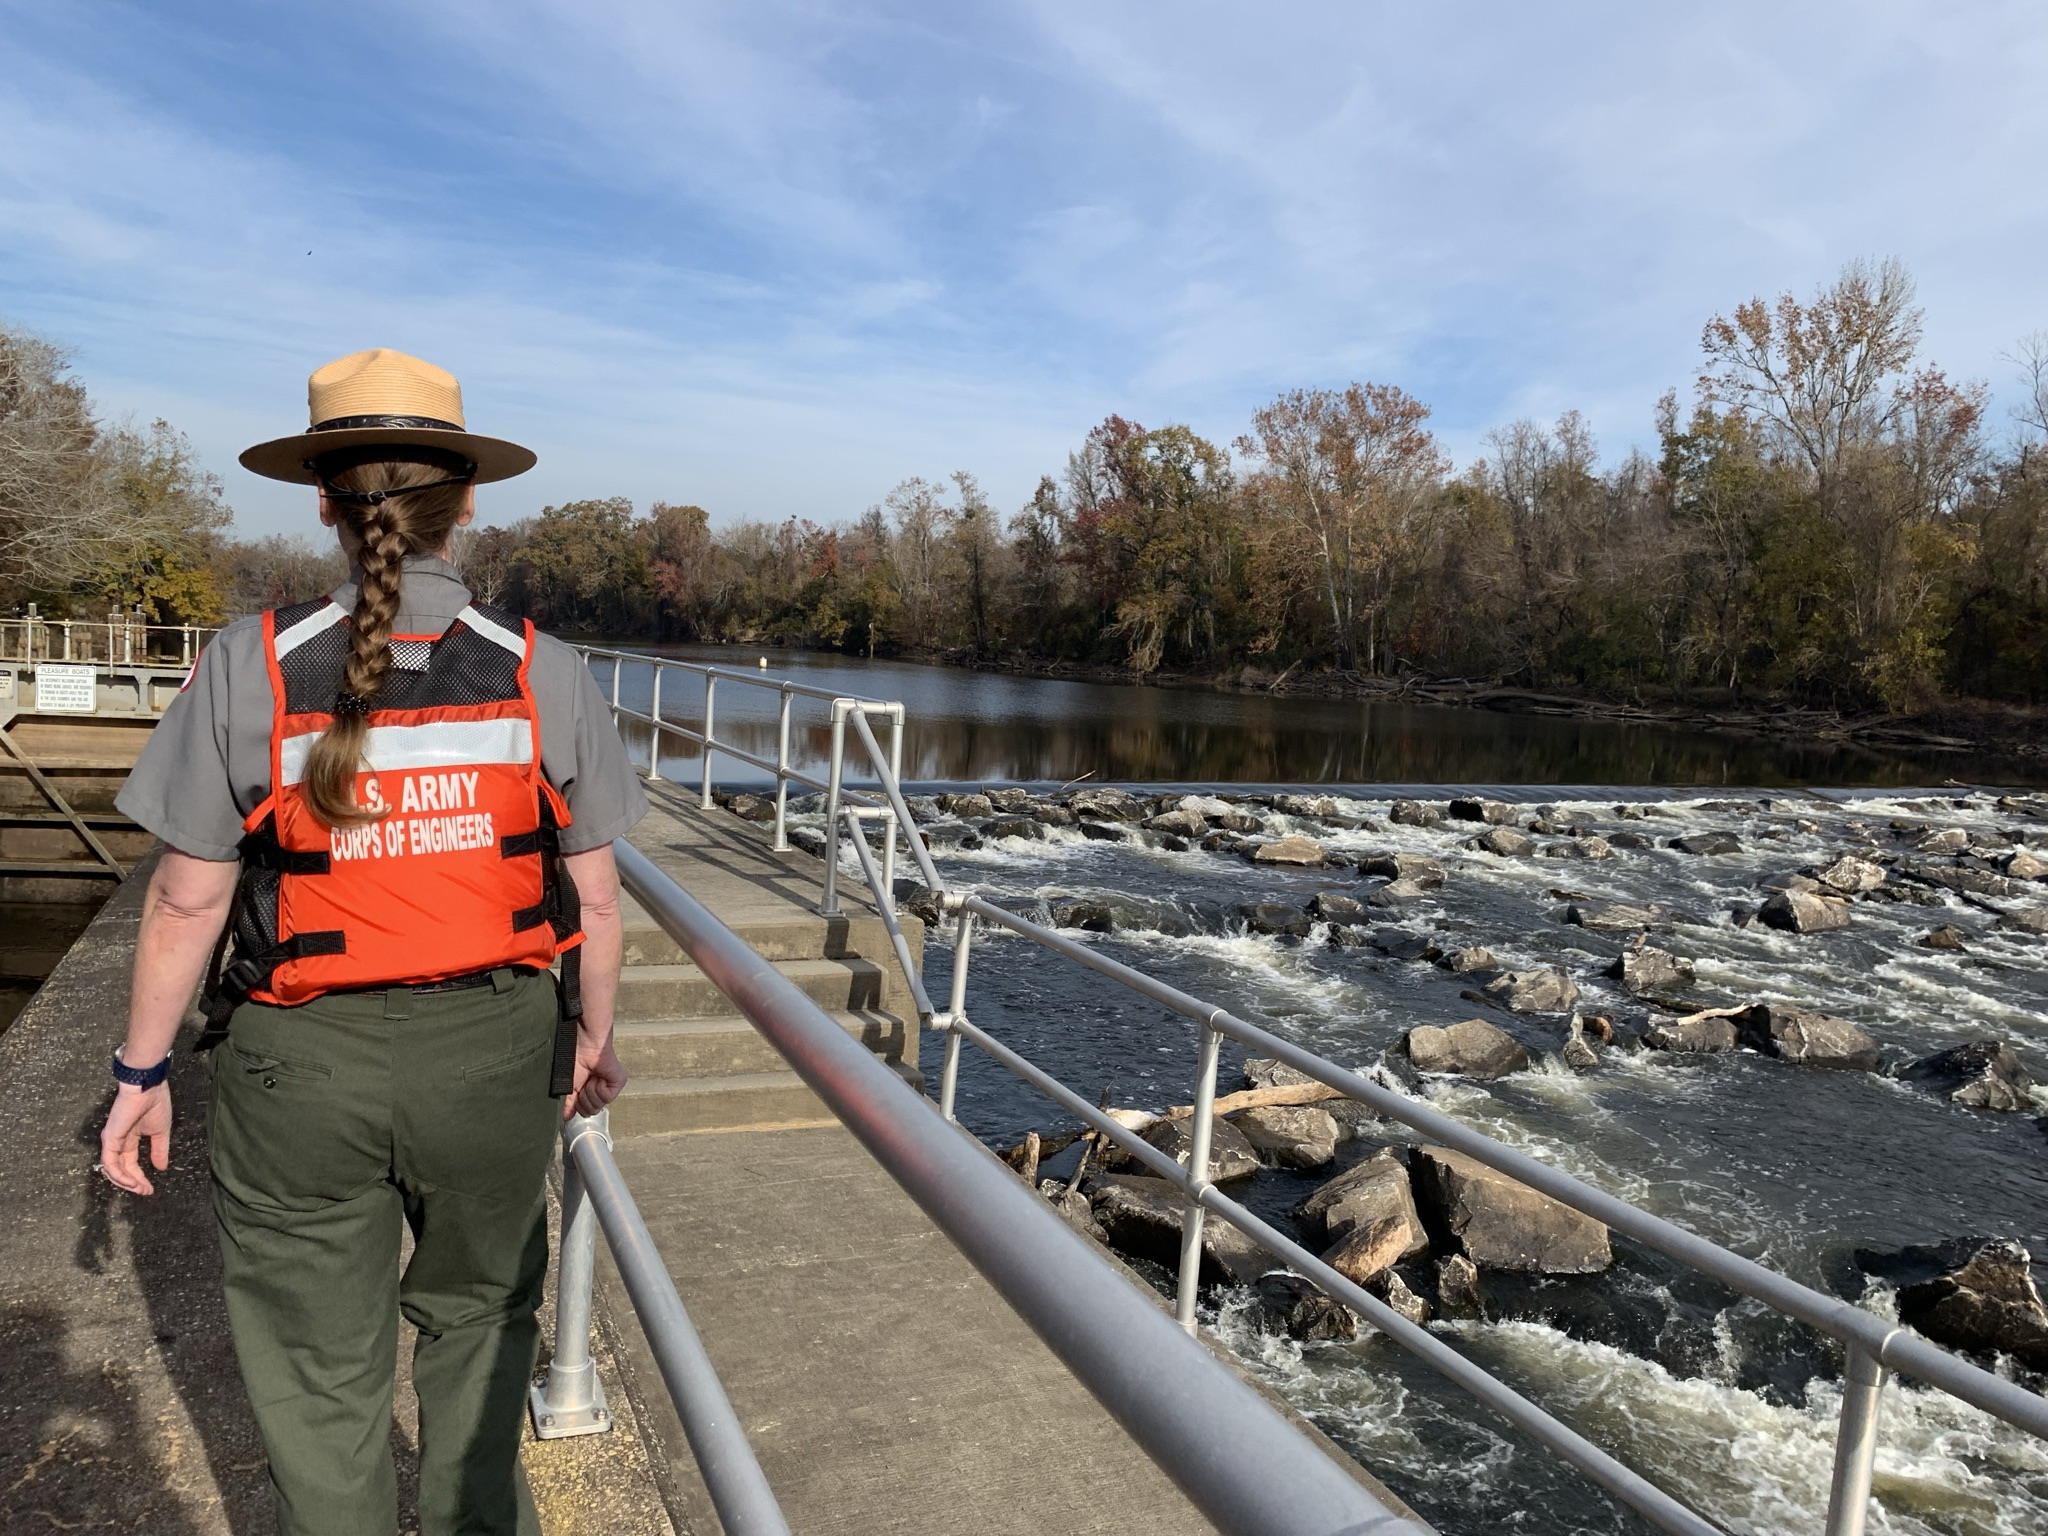 woman walks away from camera with long braided hair in green pants, orange lifejacket, and tan hat. walking atop a concrete ledge overlooking rapids in the water